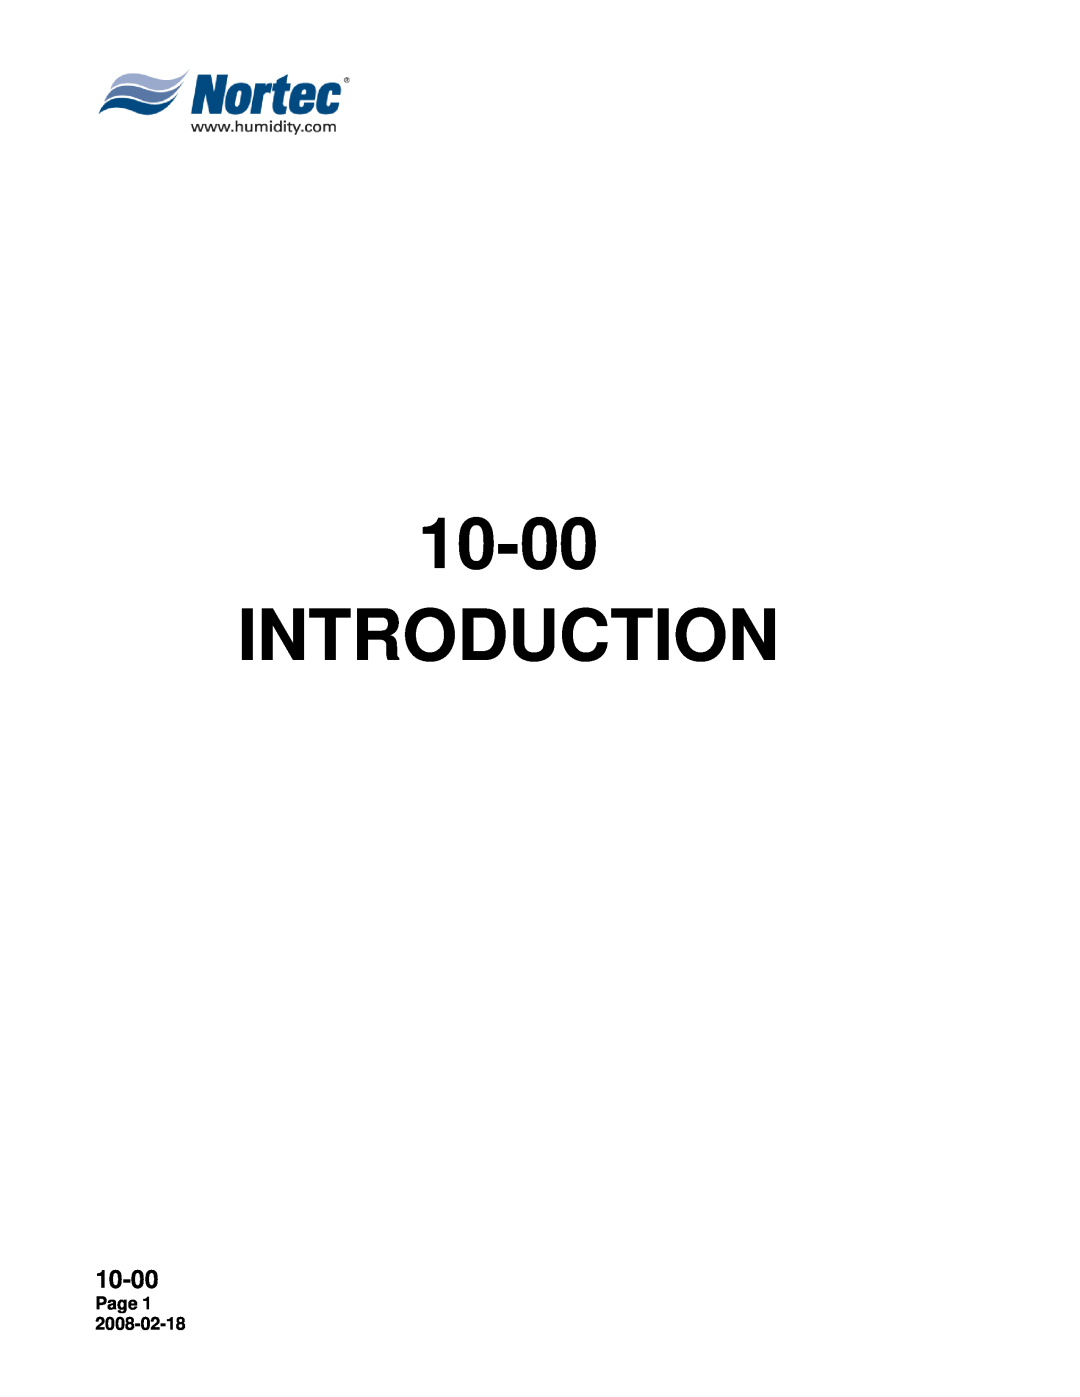 Nortec Industries NHTC Series installation manual Introduction, 10-00, Page 